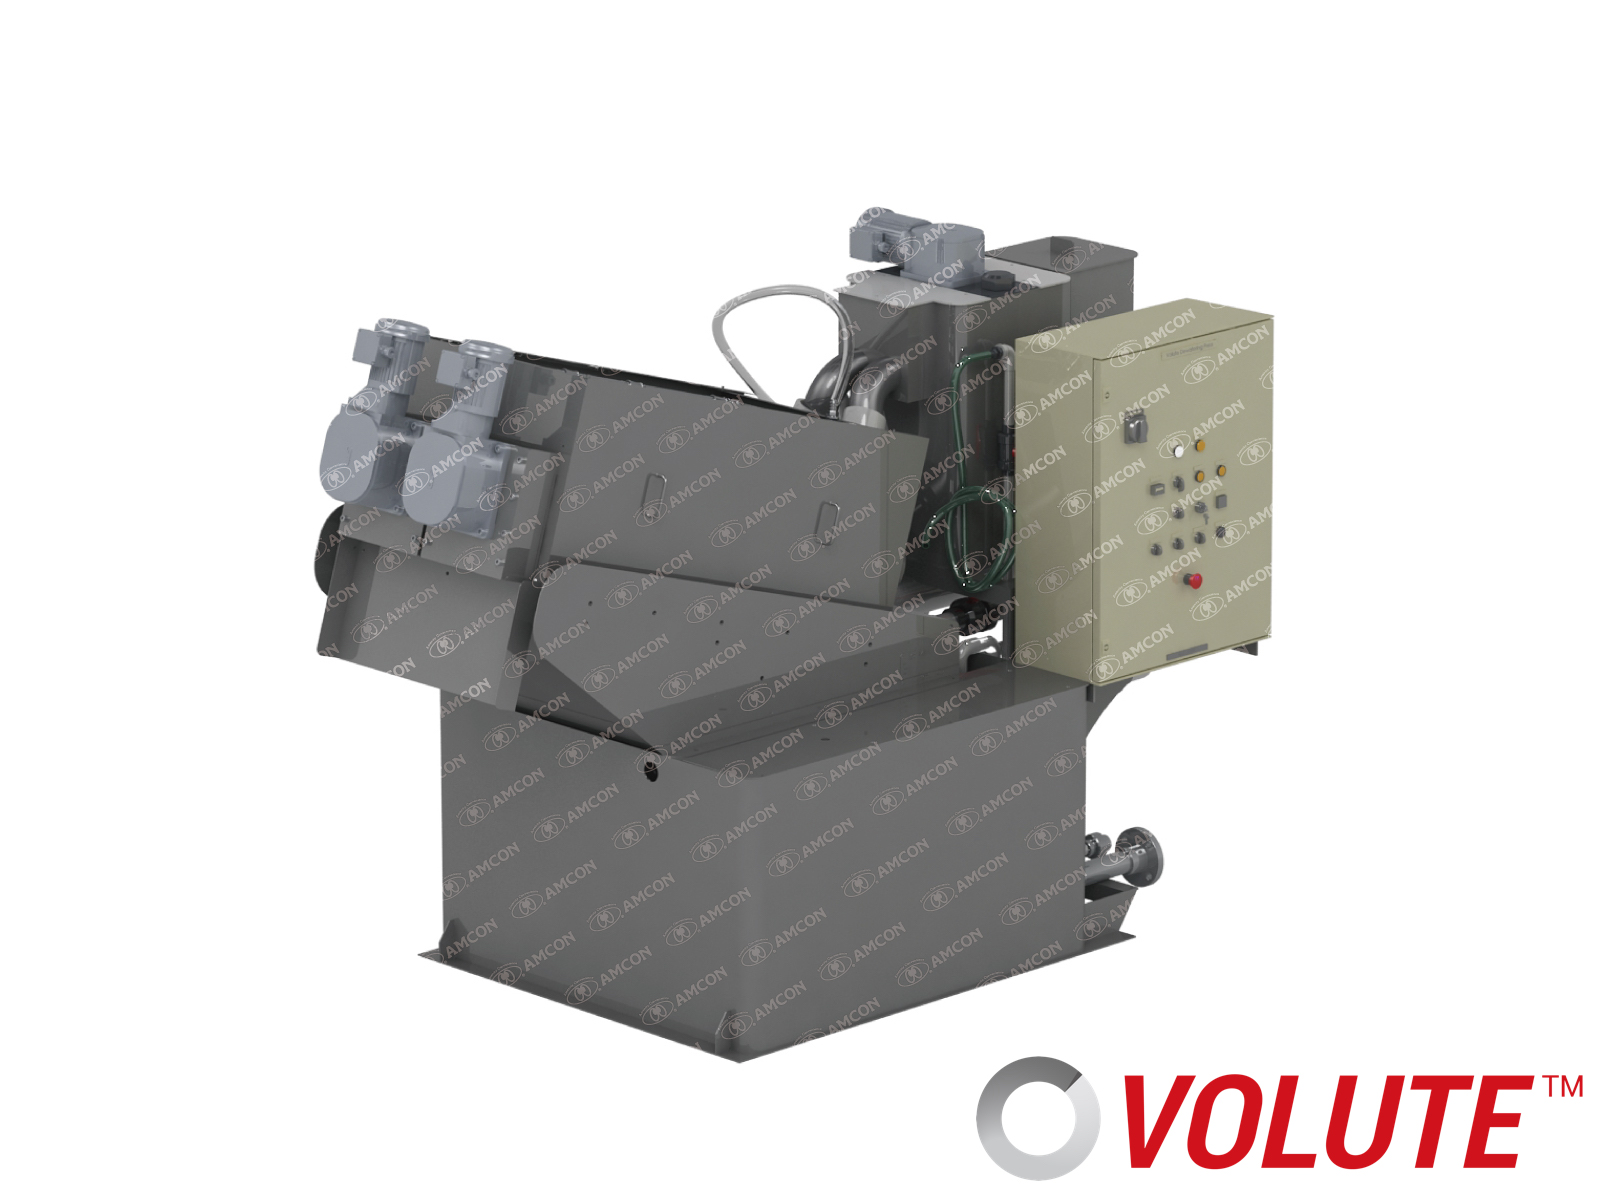 <strong>VOLUTE™ Dewatering Press</strong><br><strong>AW Series</strong>